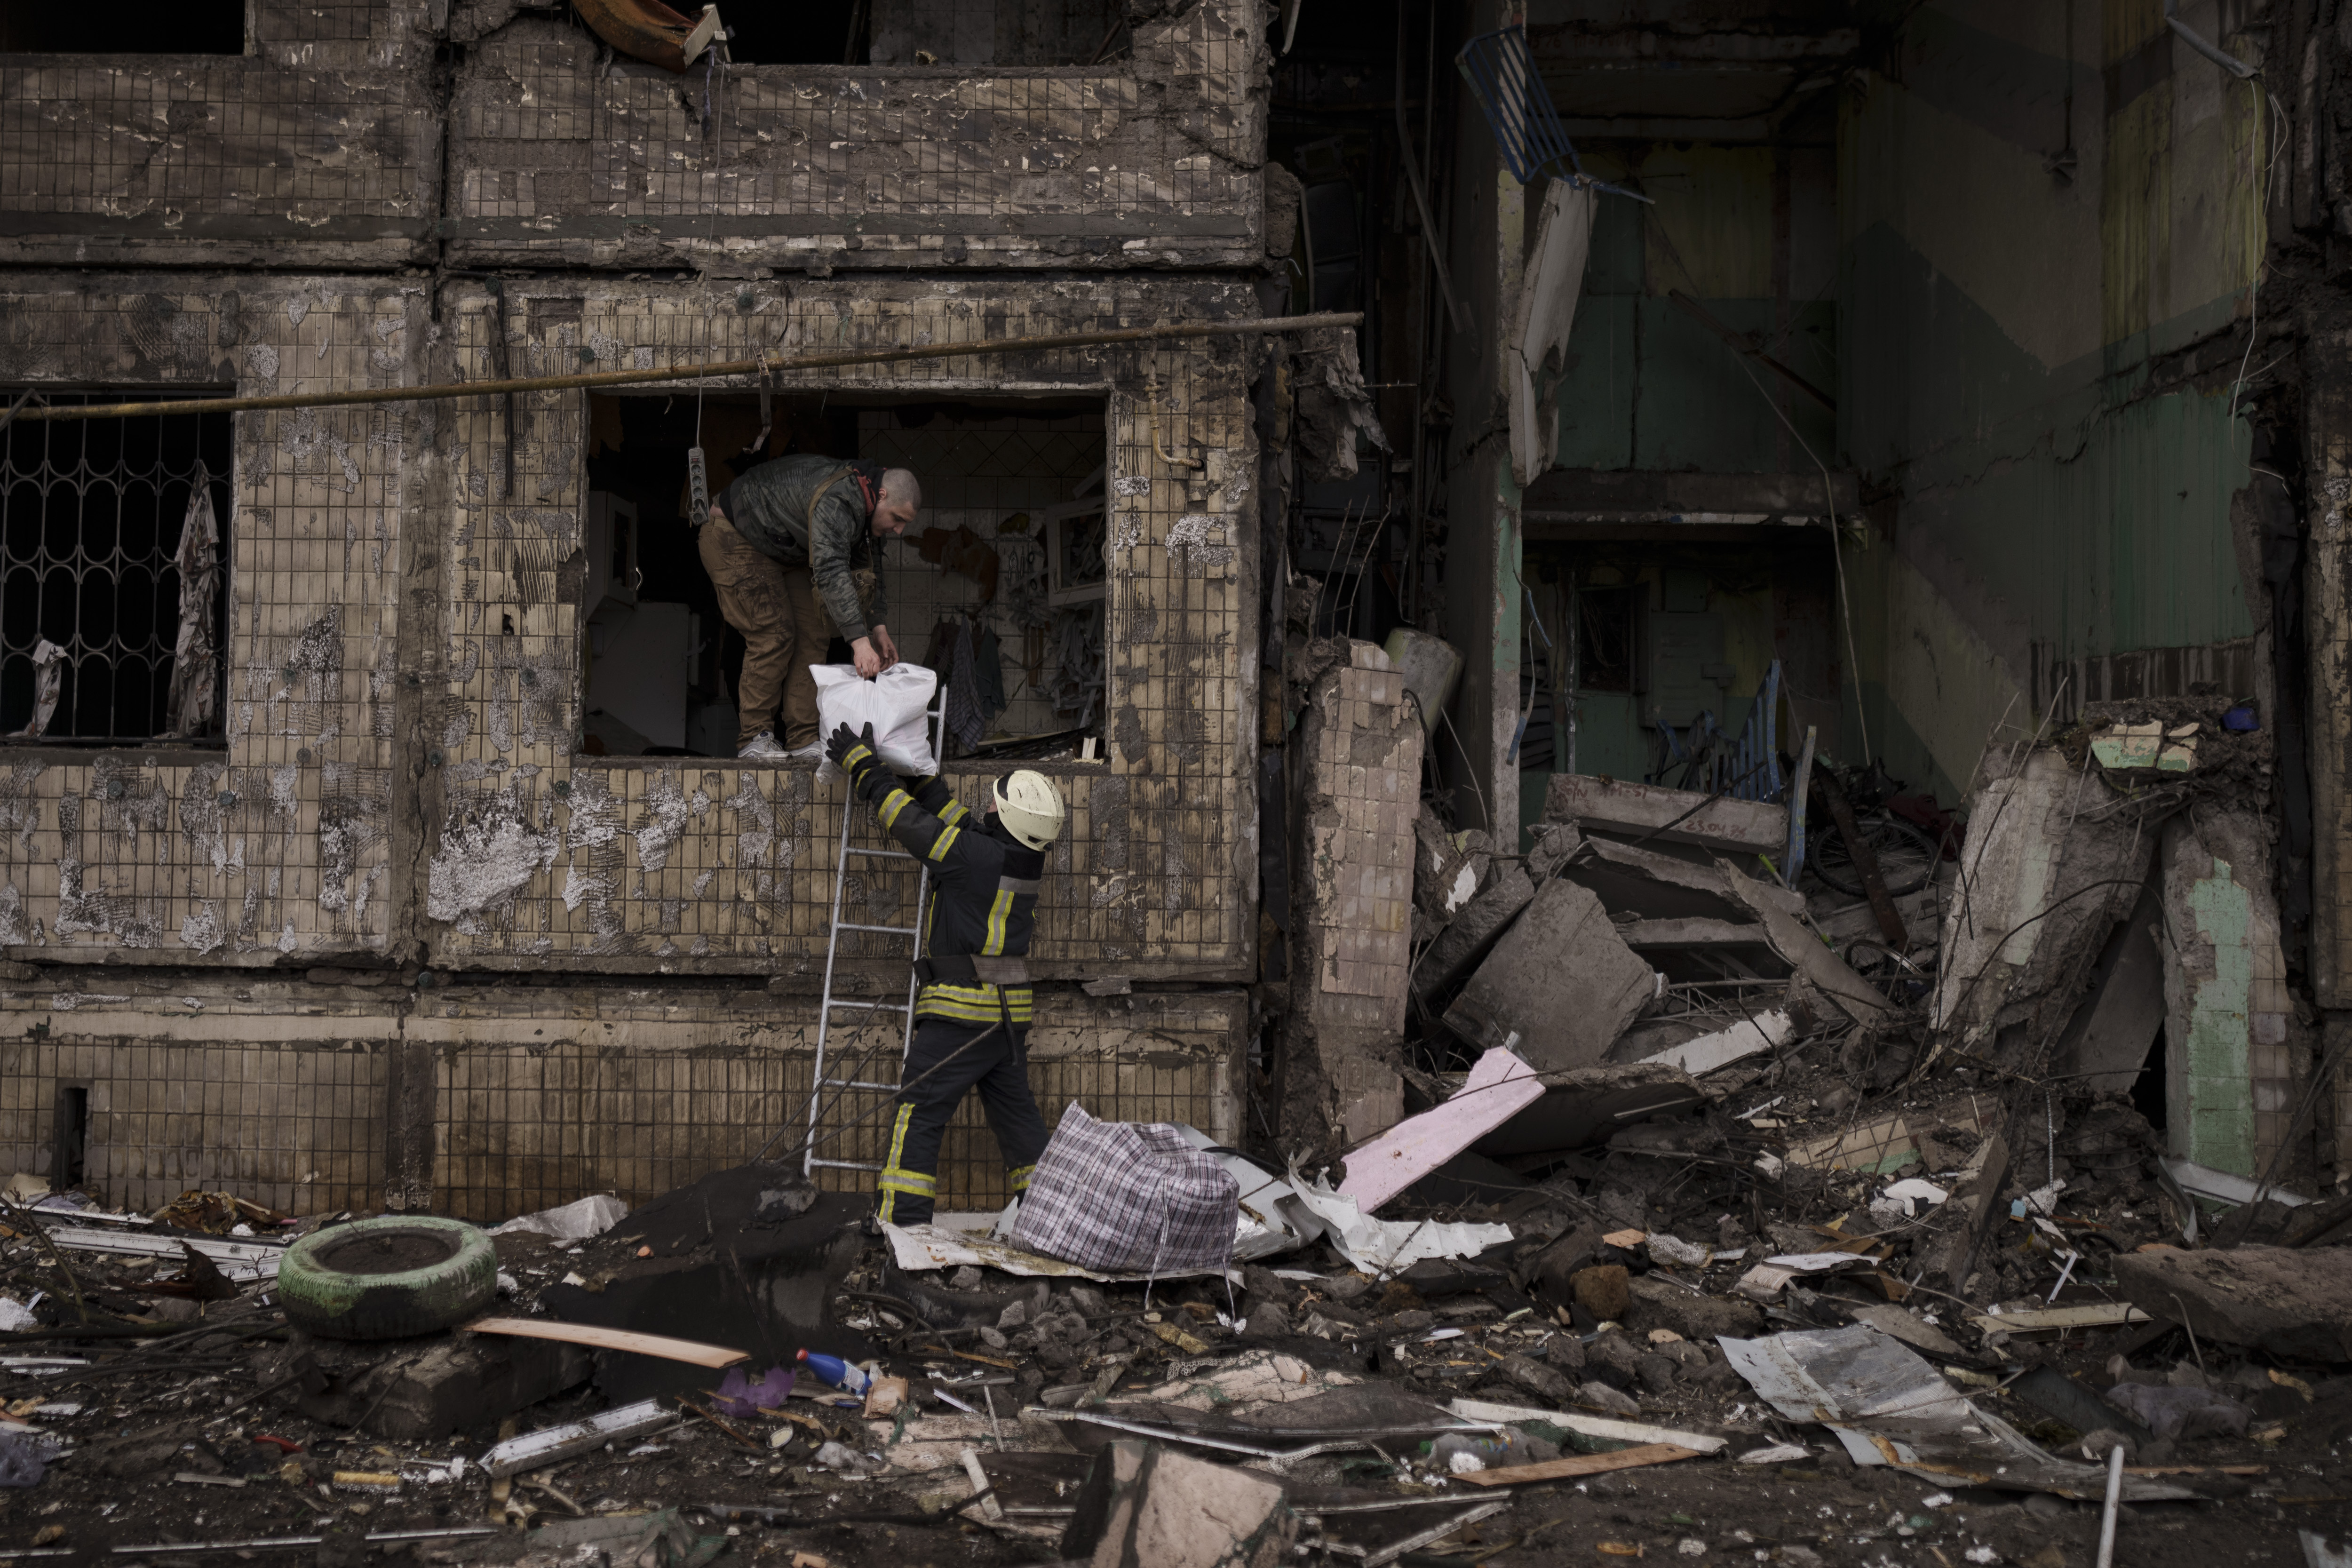 A Ukrainian firefighter helps a man remove belongings from a destroyed building after it was hit by artillery shelling in Kyiv in Kyiv, Ukraine, Monday, March 14, 2022. (AP Photo/Felipe Dana)